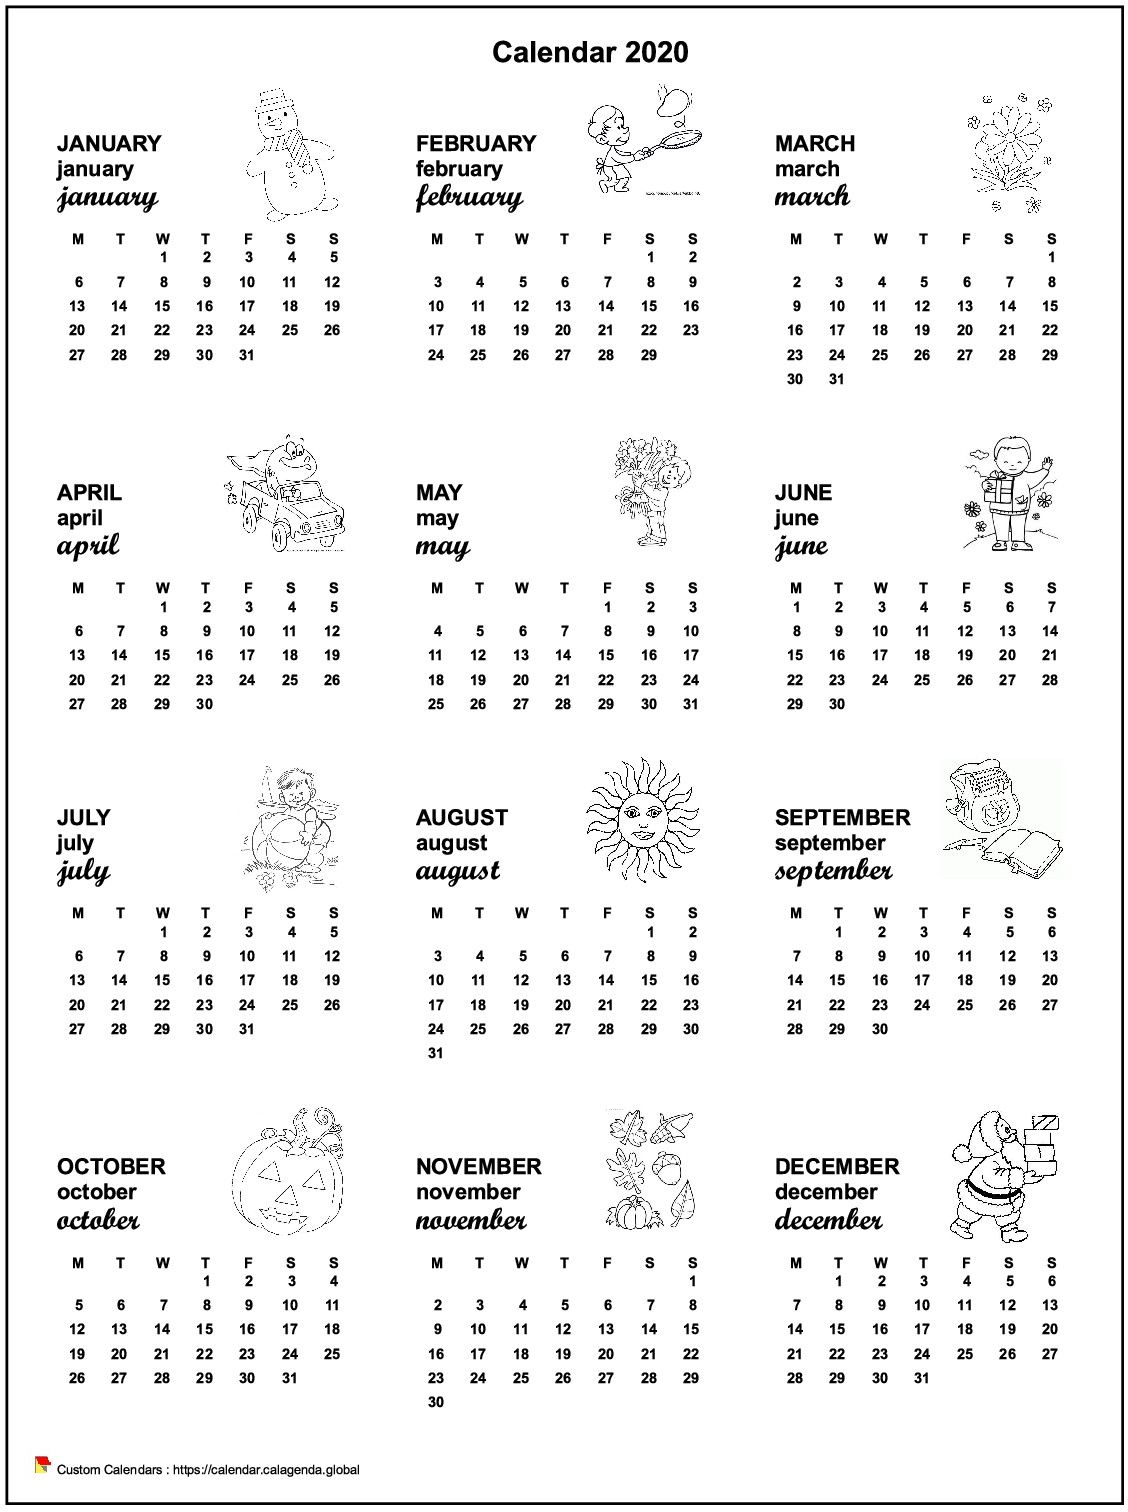 Calendar 2070 annual maternal and primary school